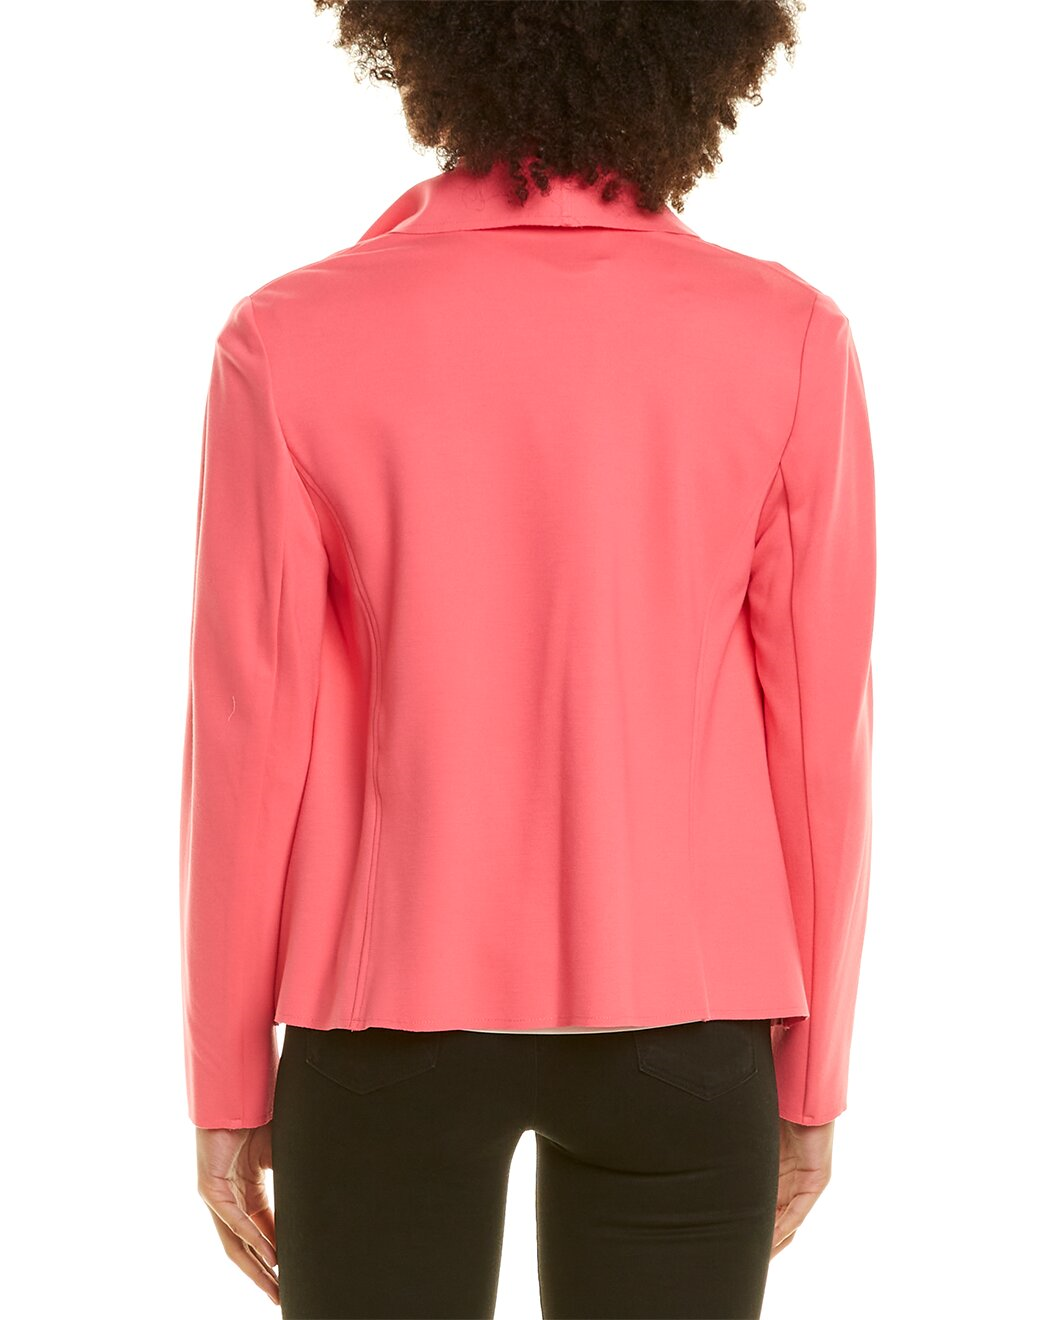 Primary image for NEW ANNE KLEIN PINK CAREER OPEN FRONT JACKET SIZE M $119